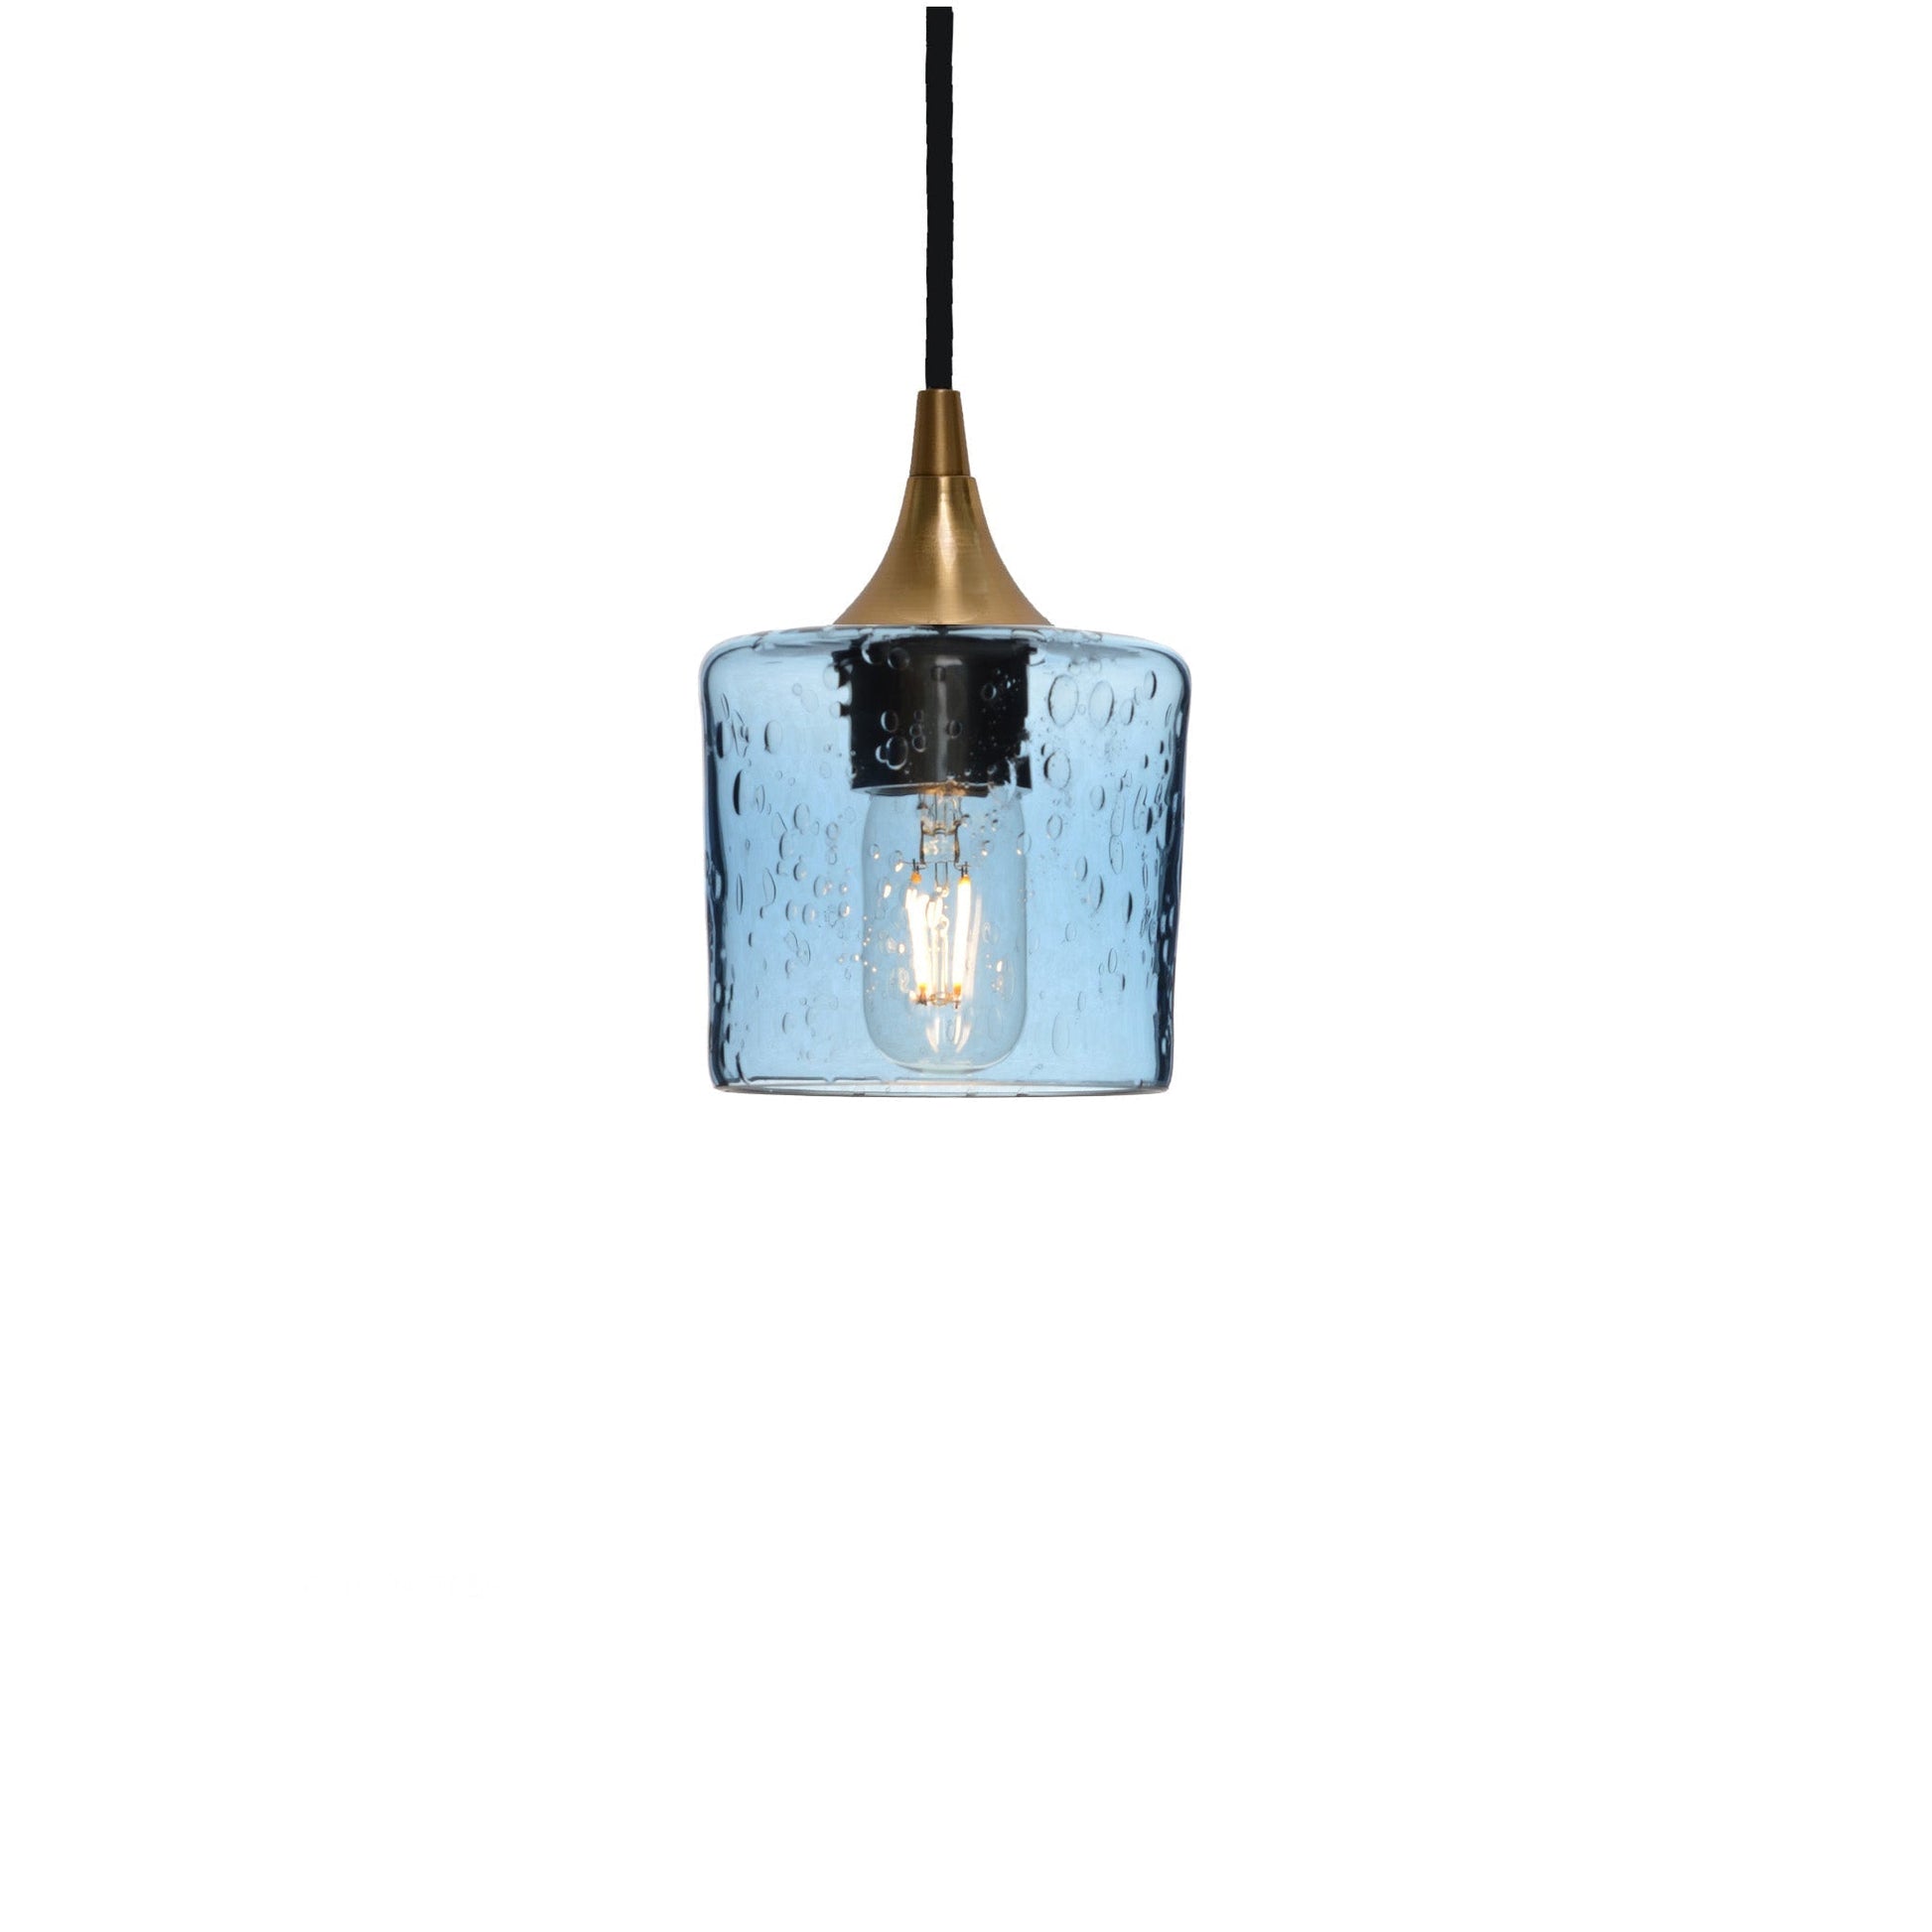 601 Lunar: Single Pendant Light-Glass-Bicycle Glass Co - Hotshop-Steel Blue-Bicycle Glass Co